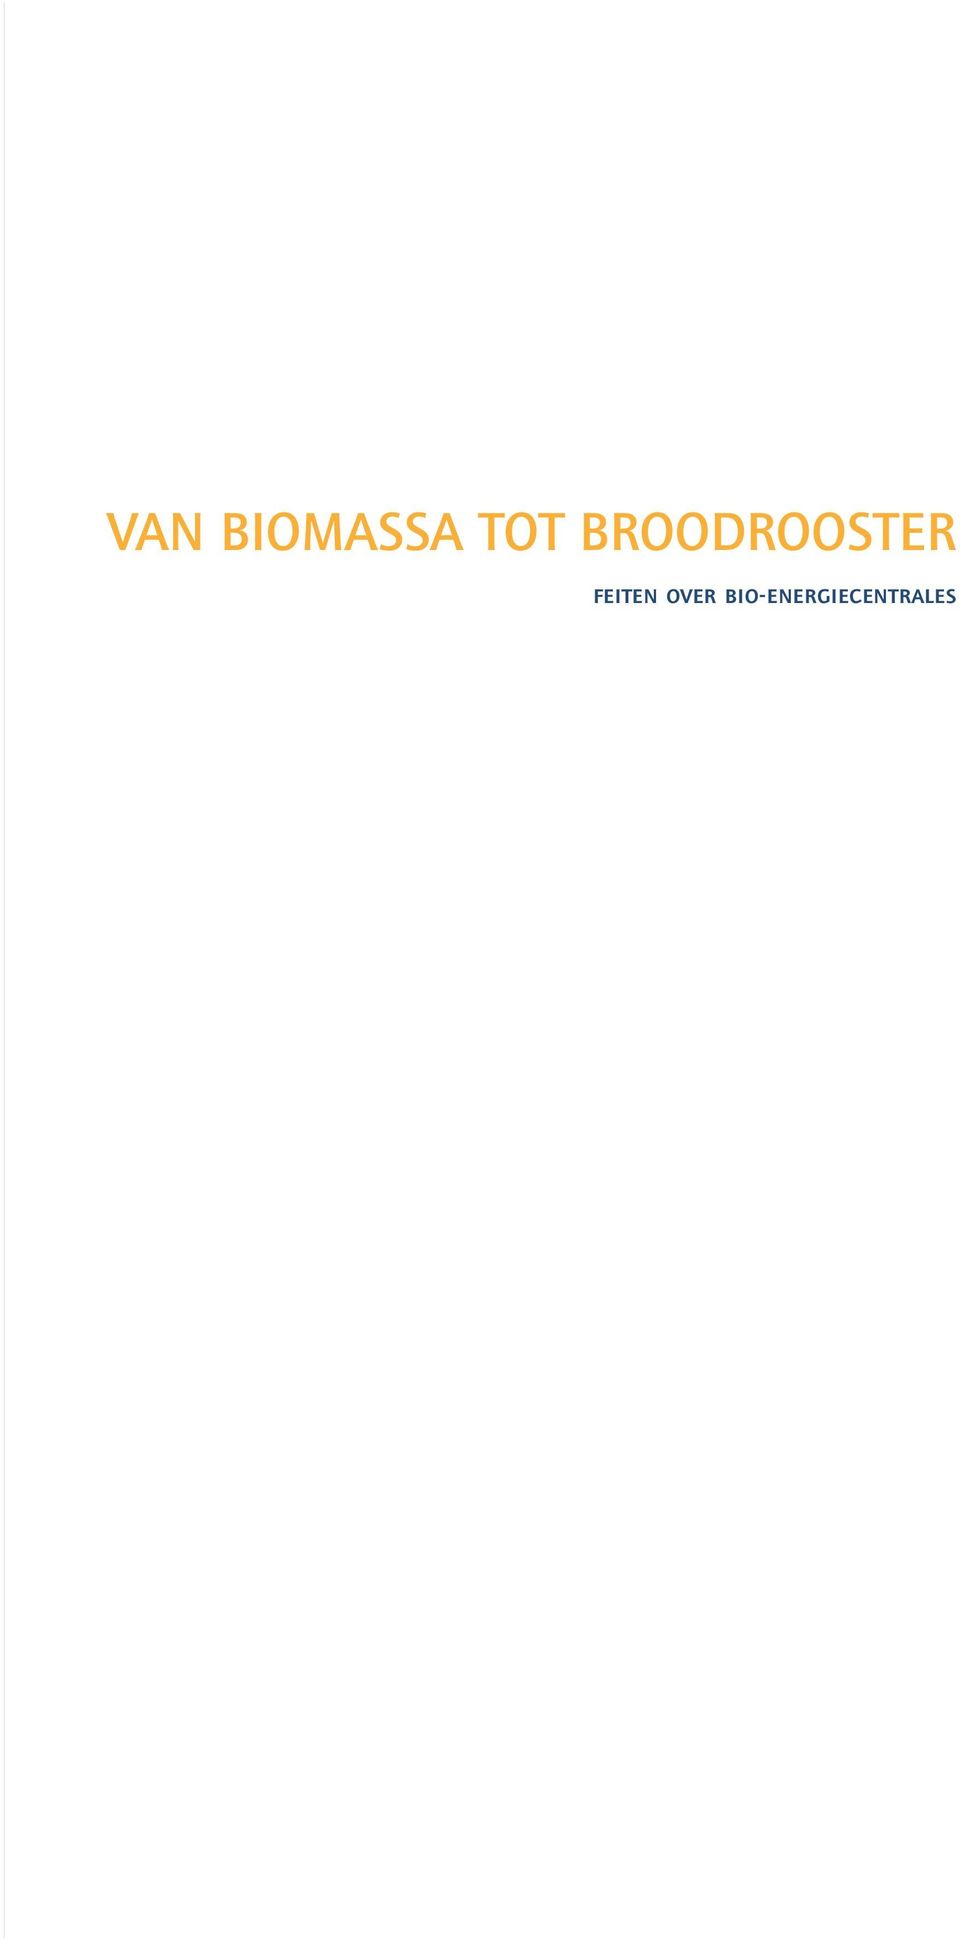 BROODROOSTER